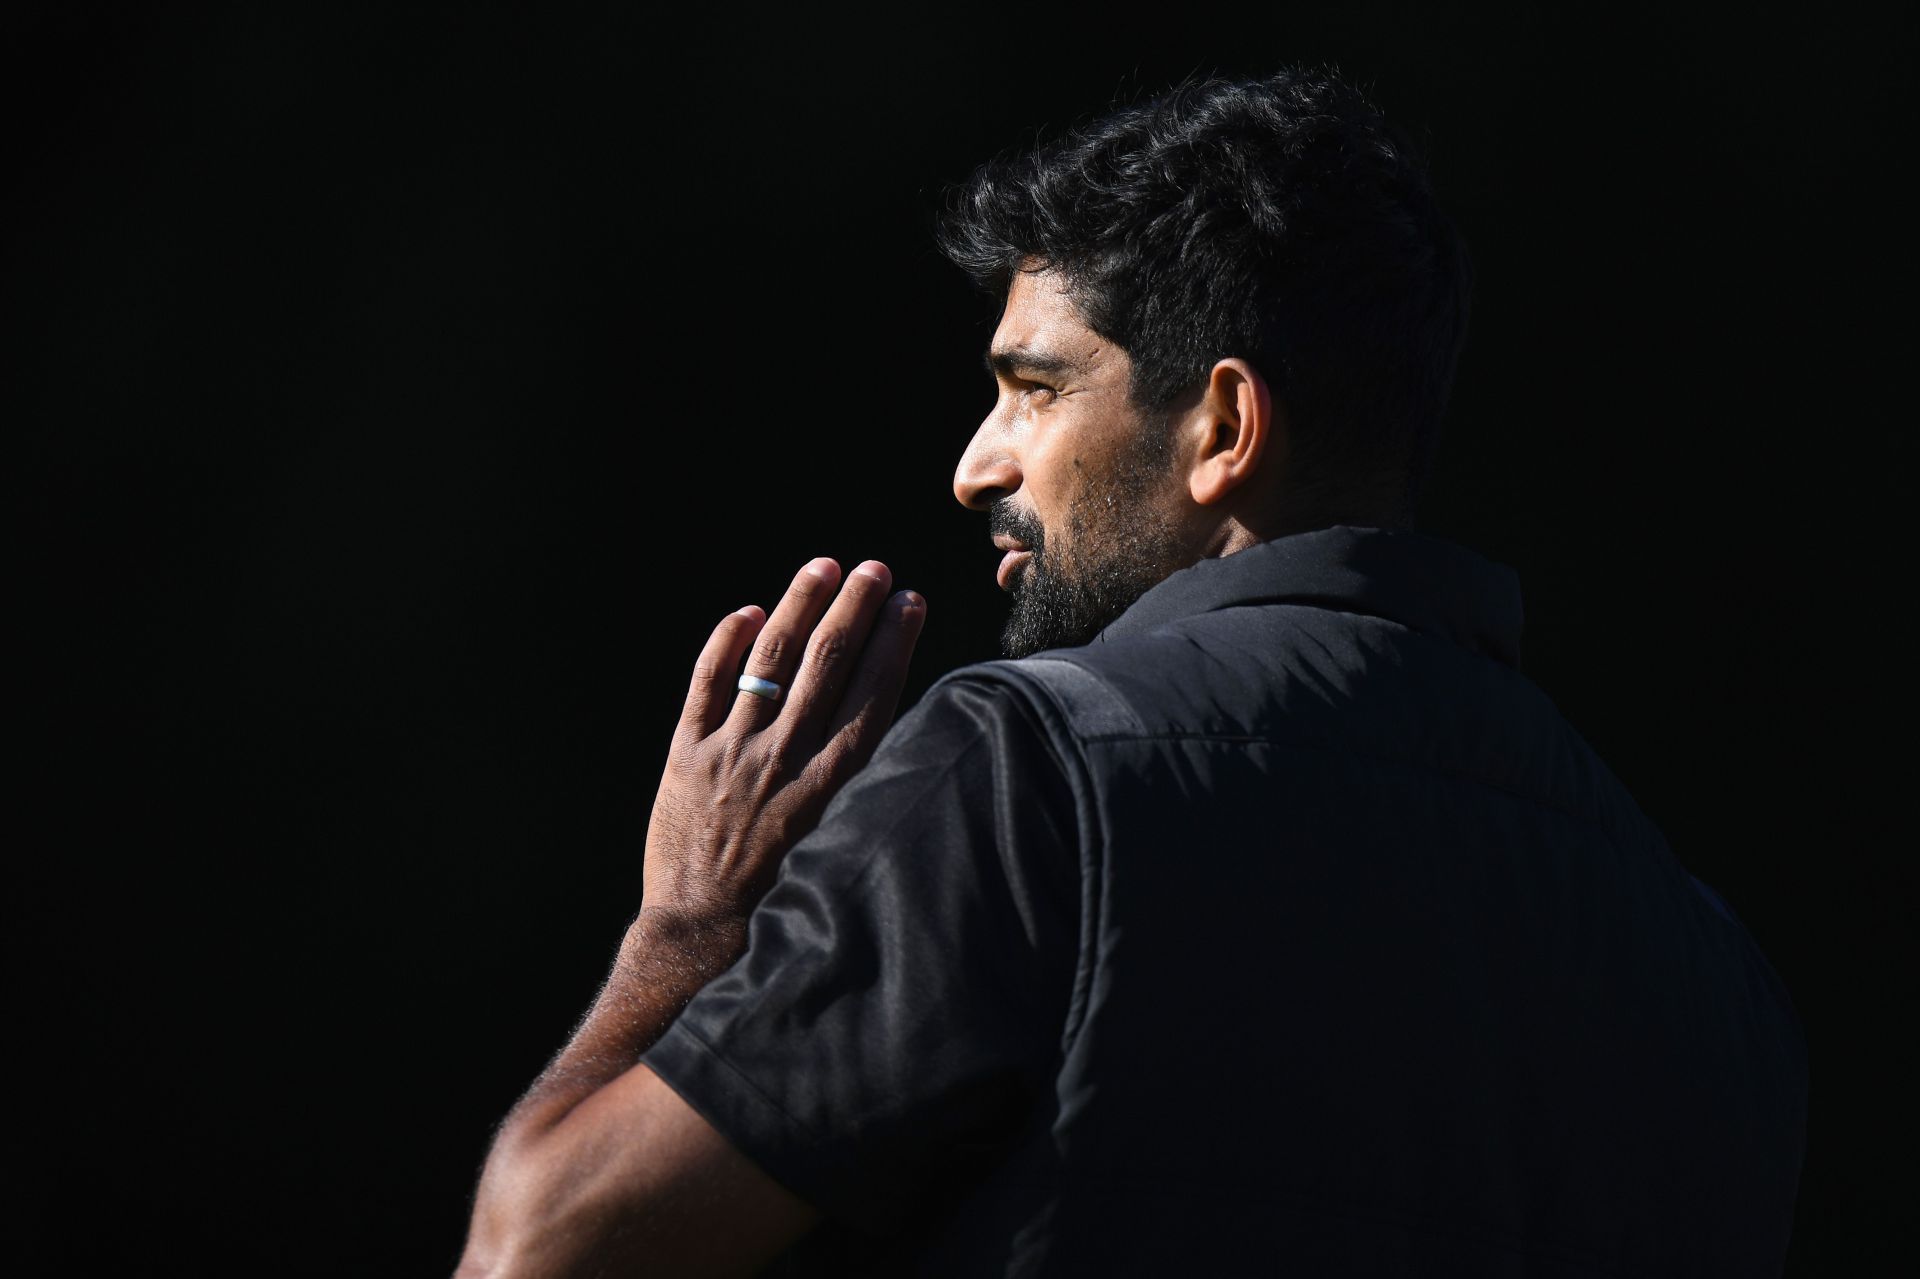 Ish Sodhi is expected to play a vital part for New Zealand against India today.